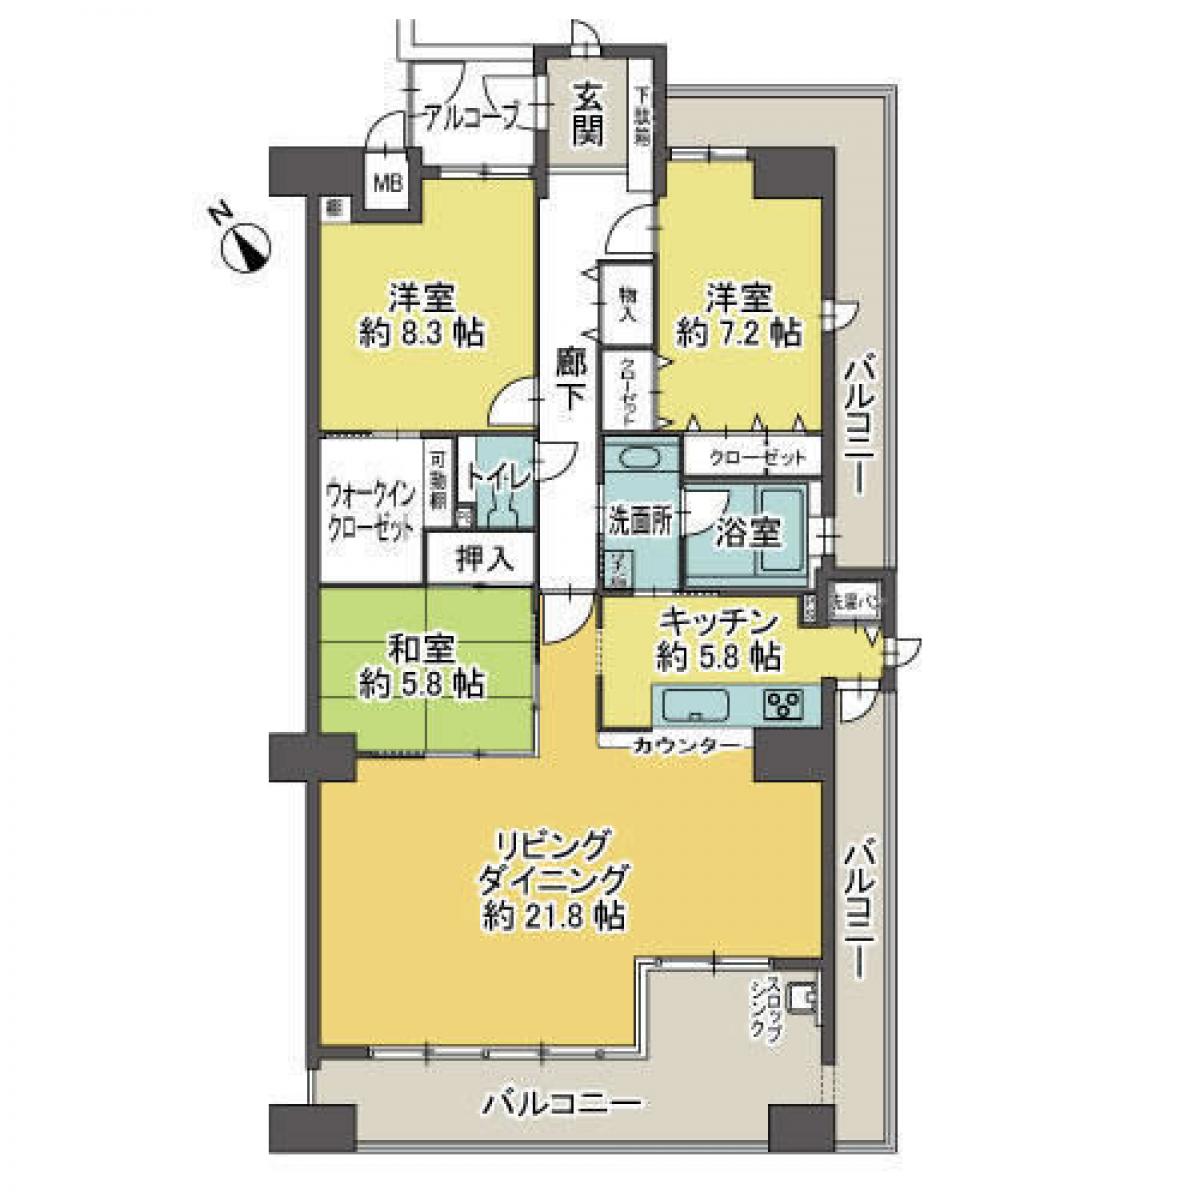 Picture of Apartment For Sale in Kariya Shi, Aichi, Japan